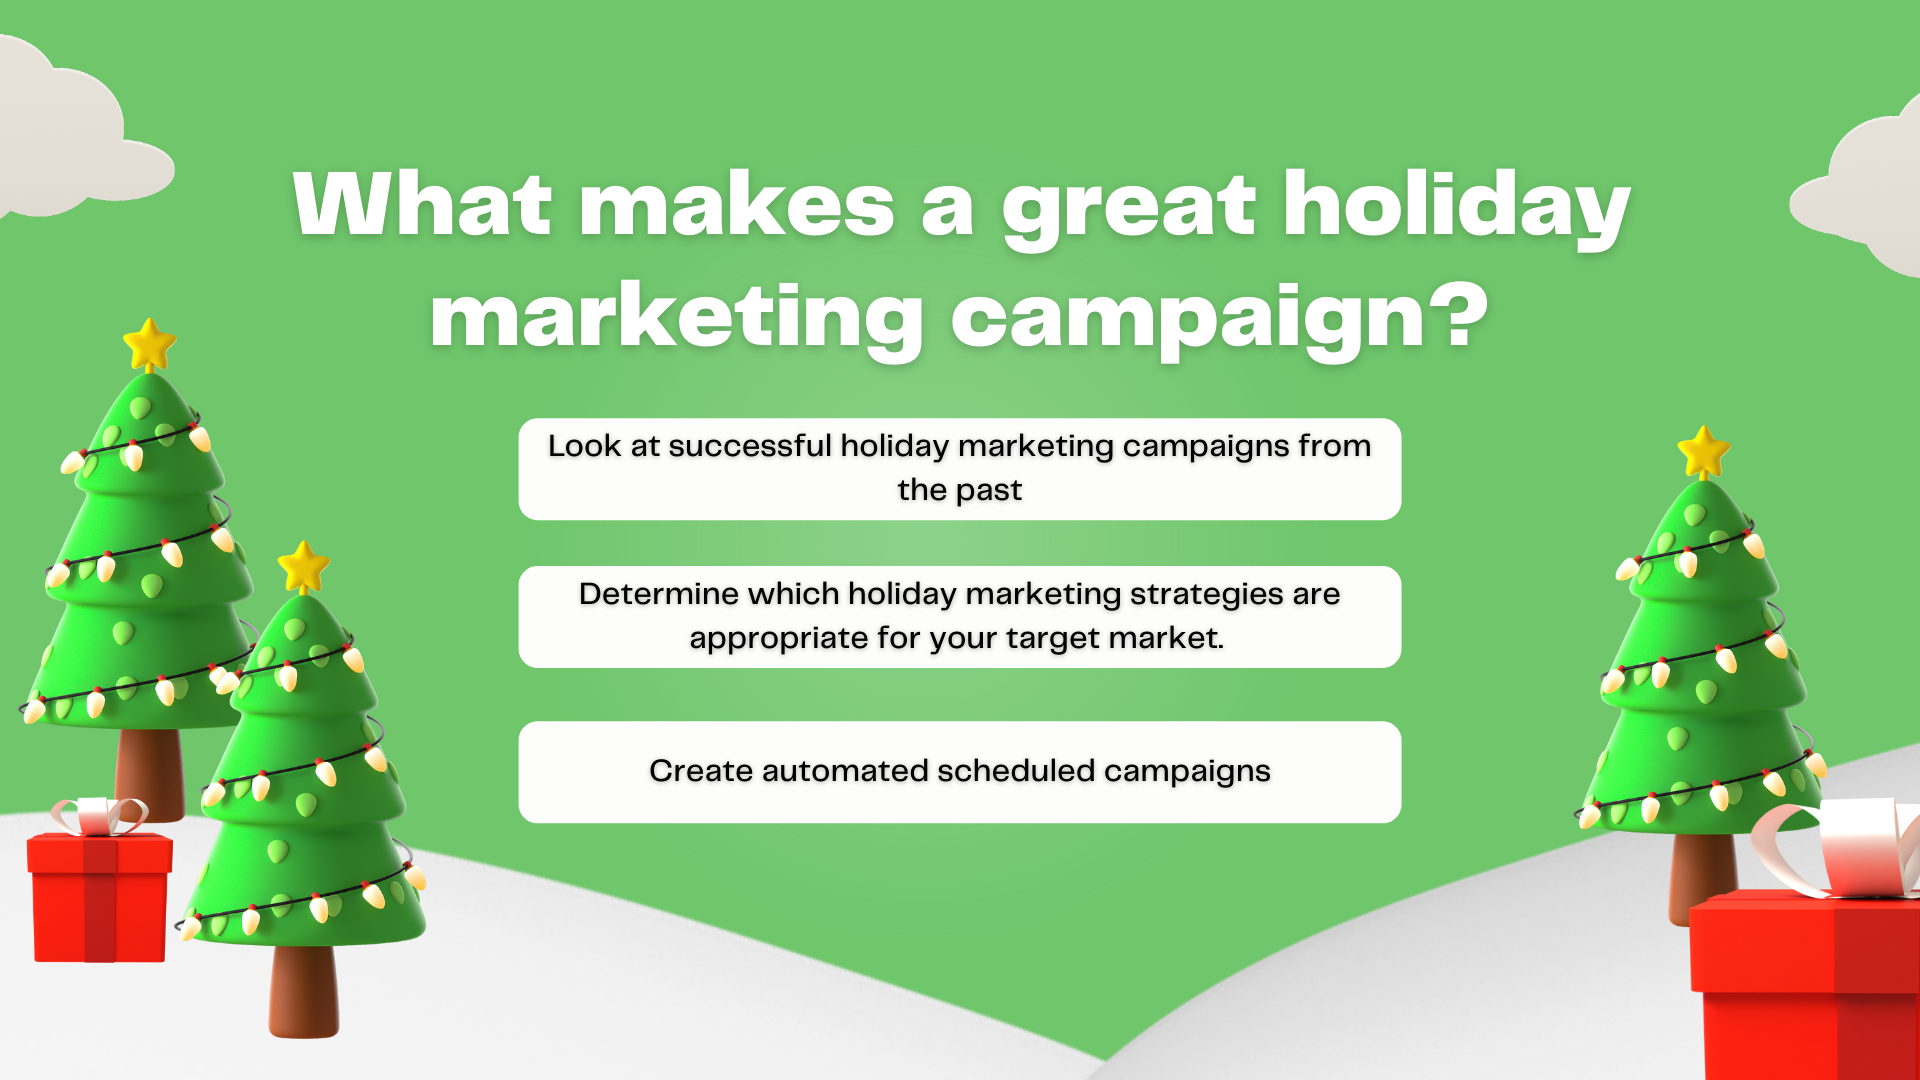 What makes a great holiday marketing campaign